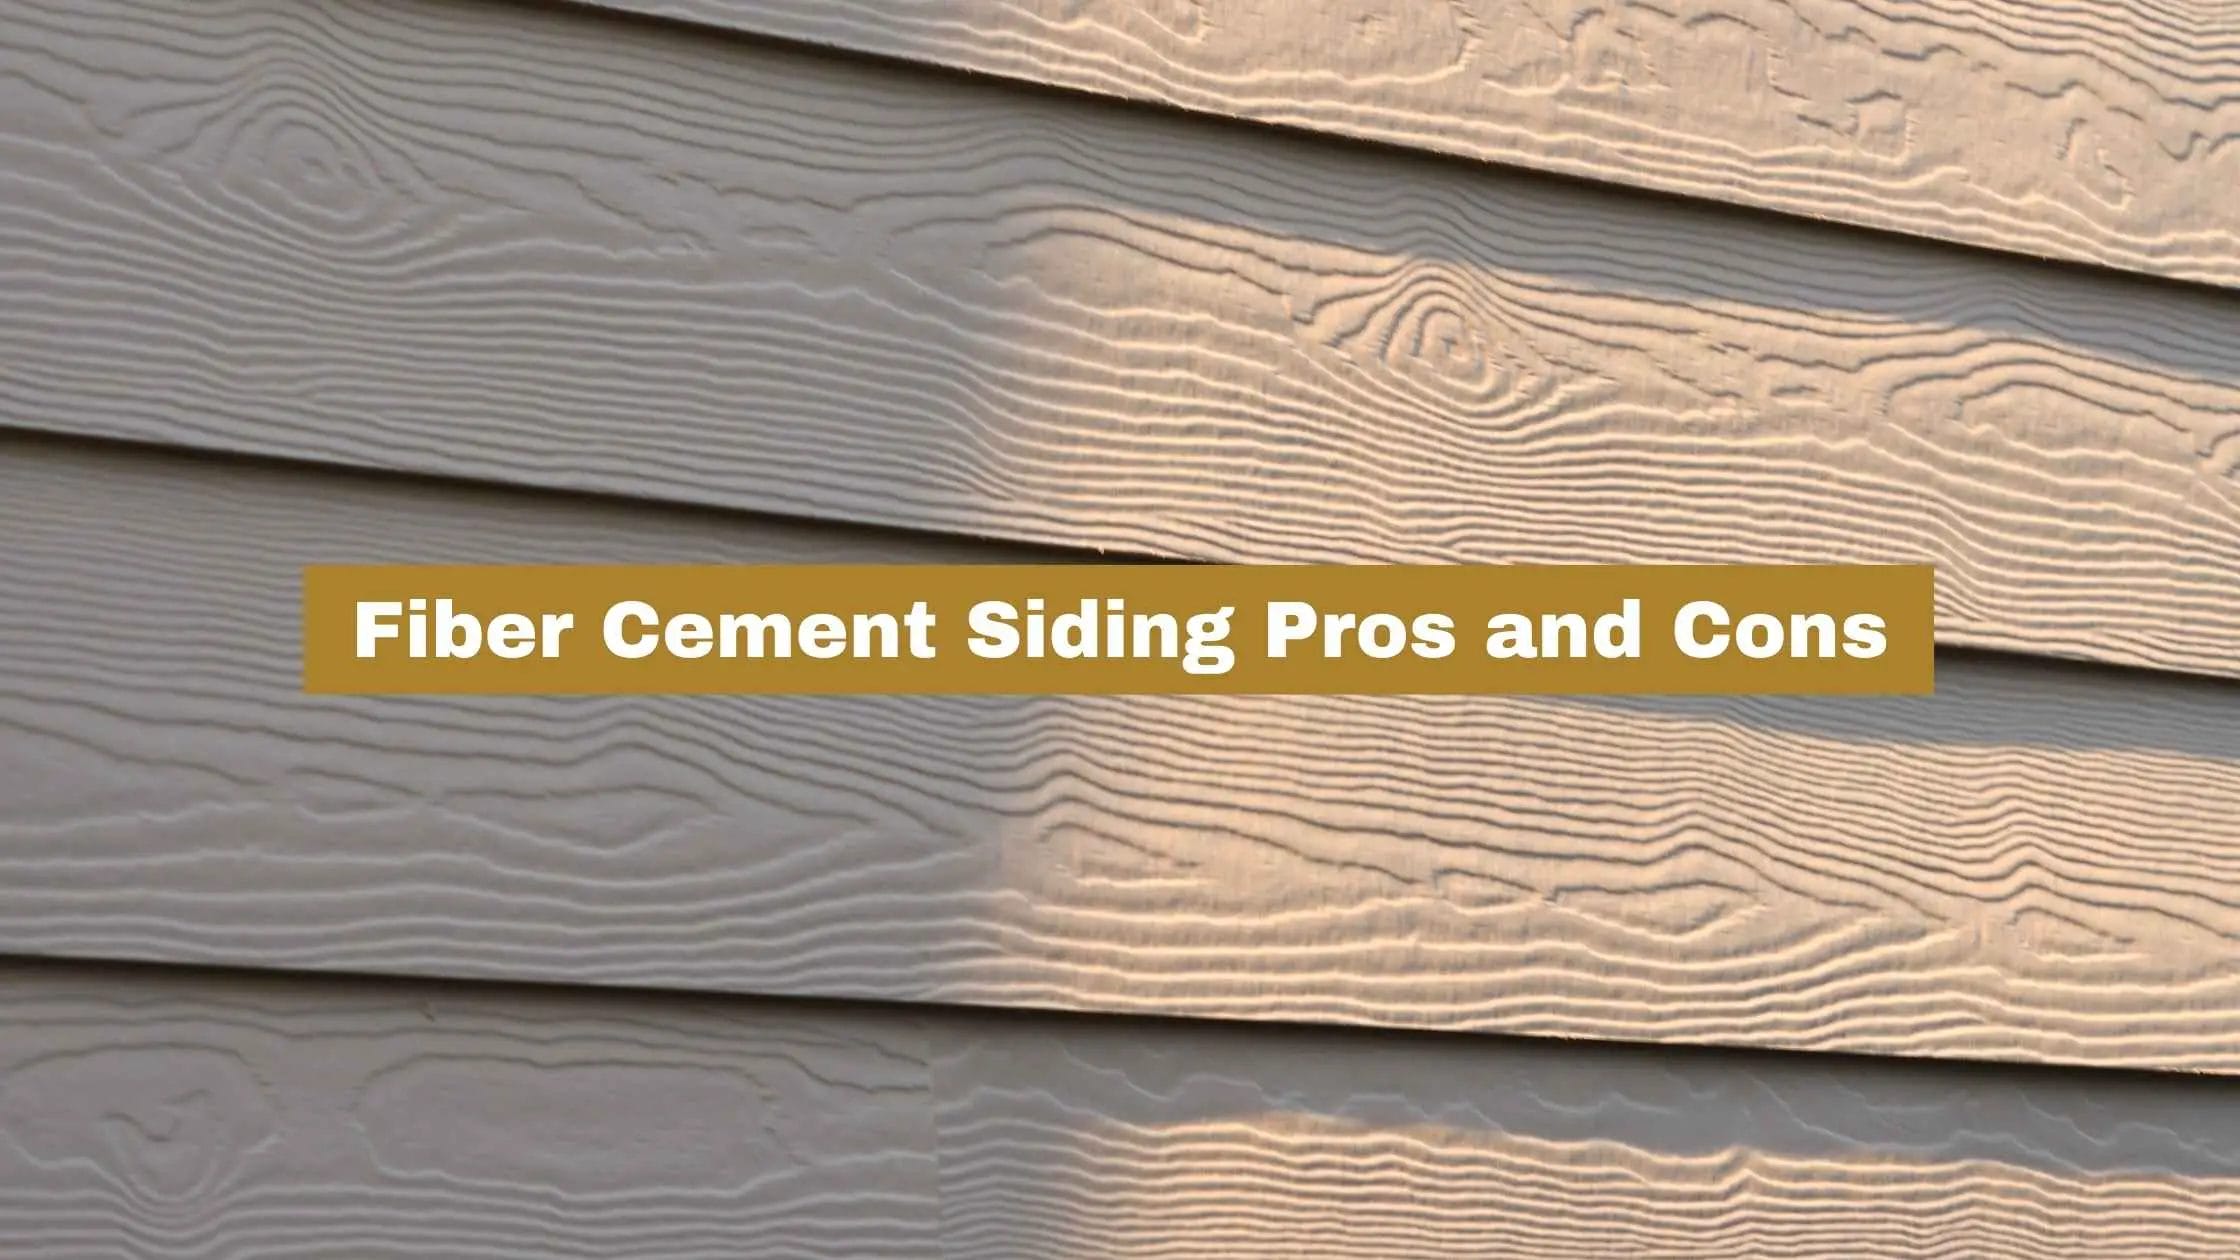 Fiber Cement Siding Pros and Cons